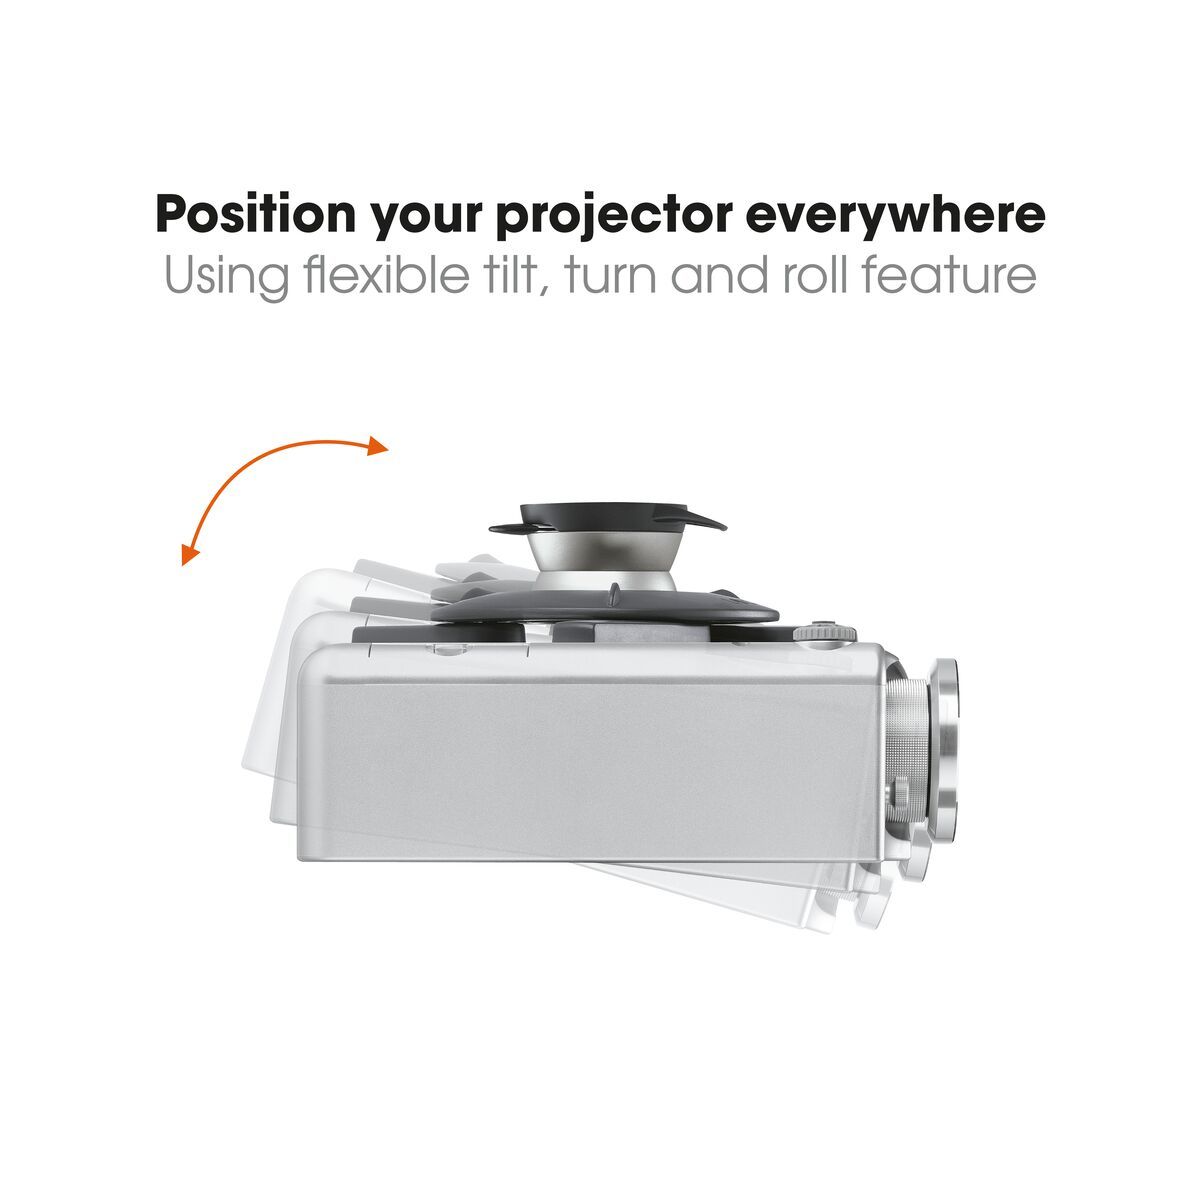 Vogel's EPW 6565 Projector Wall Mount - Max. weight load: 10 kg - USP